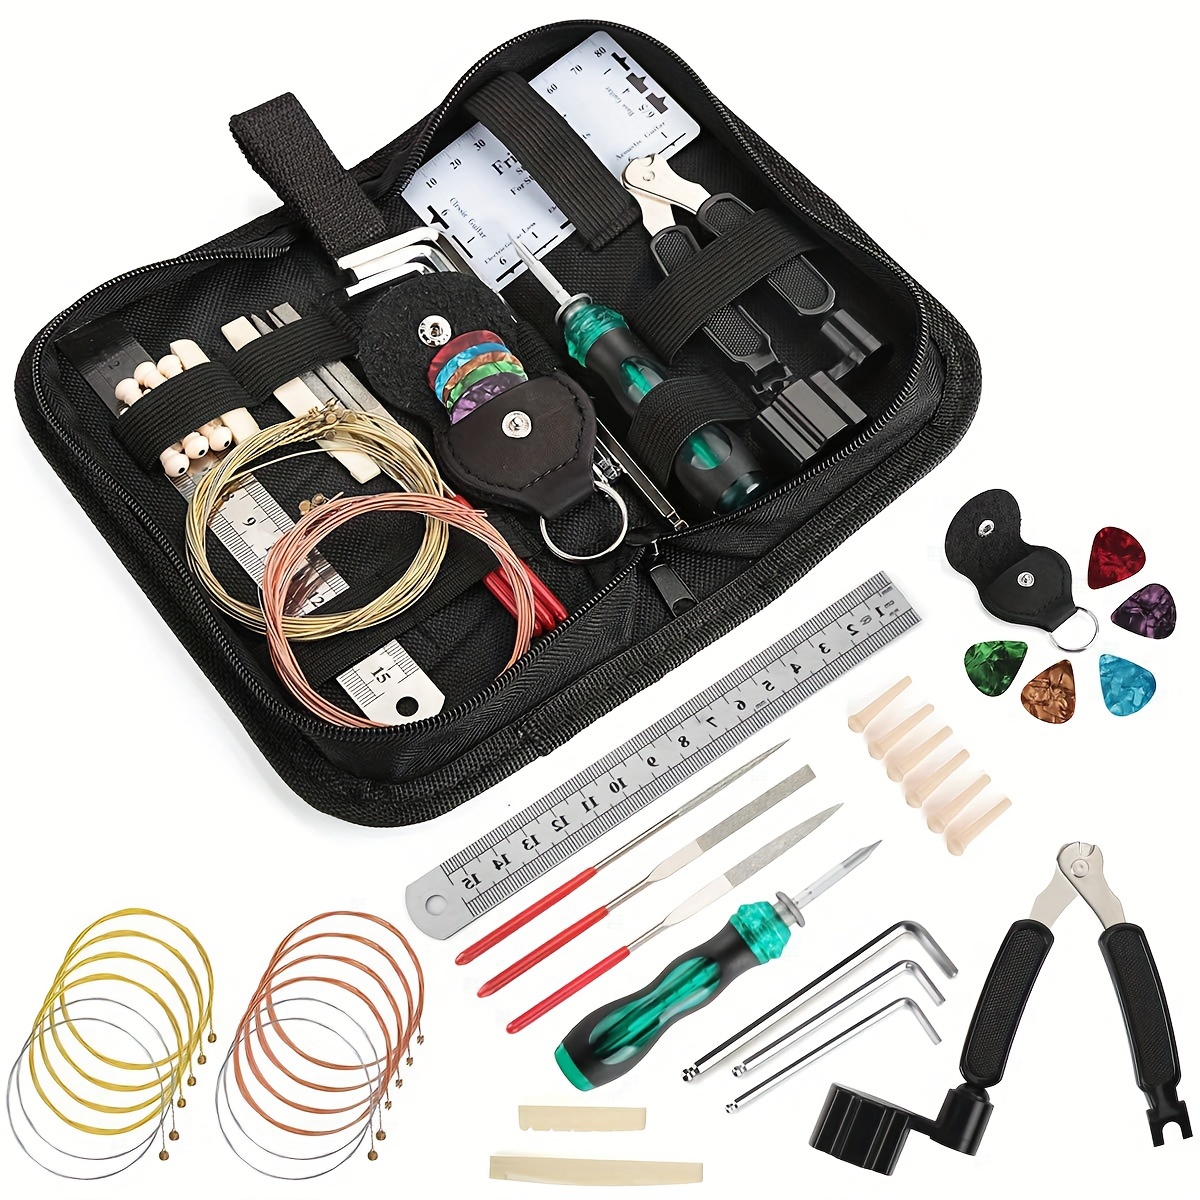 

Guitar Repair Kit Set - String Changing Tool, Tuning Wrench, File, Ruler, And Accessory Bag - Perfect Gift For Musicians And Guitar Enthusiasts